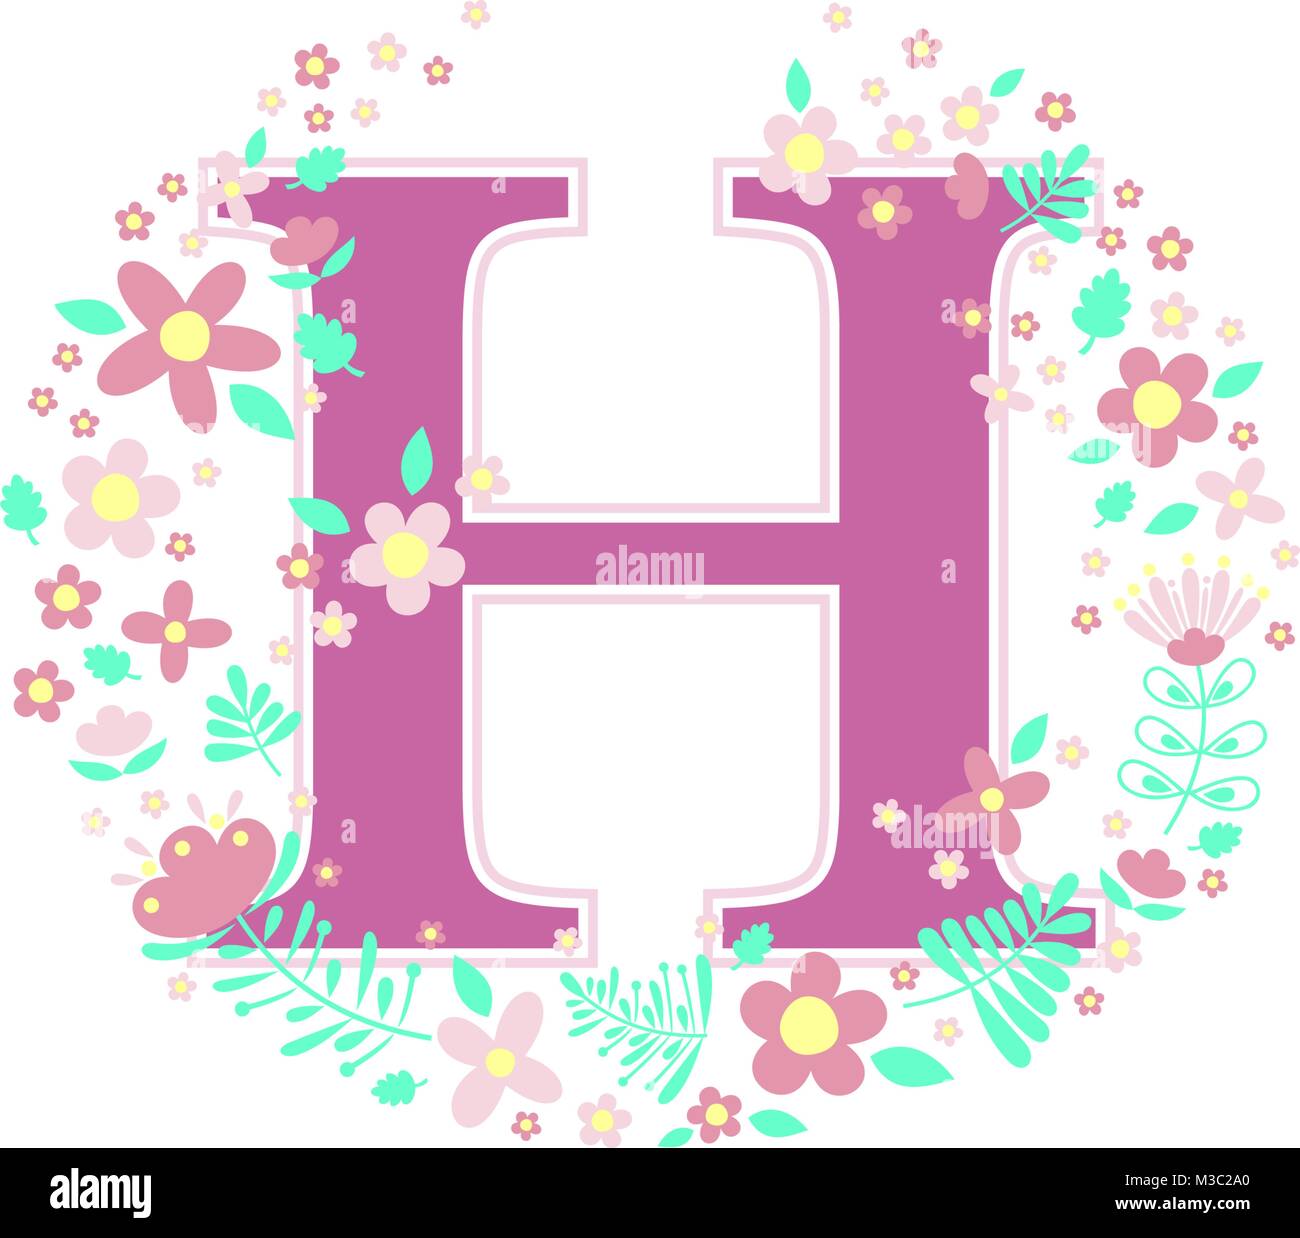 initial letter h with decorative flowers and design elements isolated on white background. can be used for baby name, nursery decoration, spring theme Stock Vector